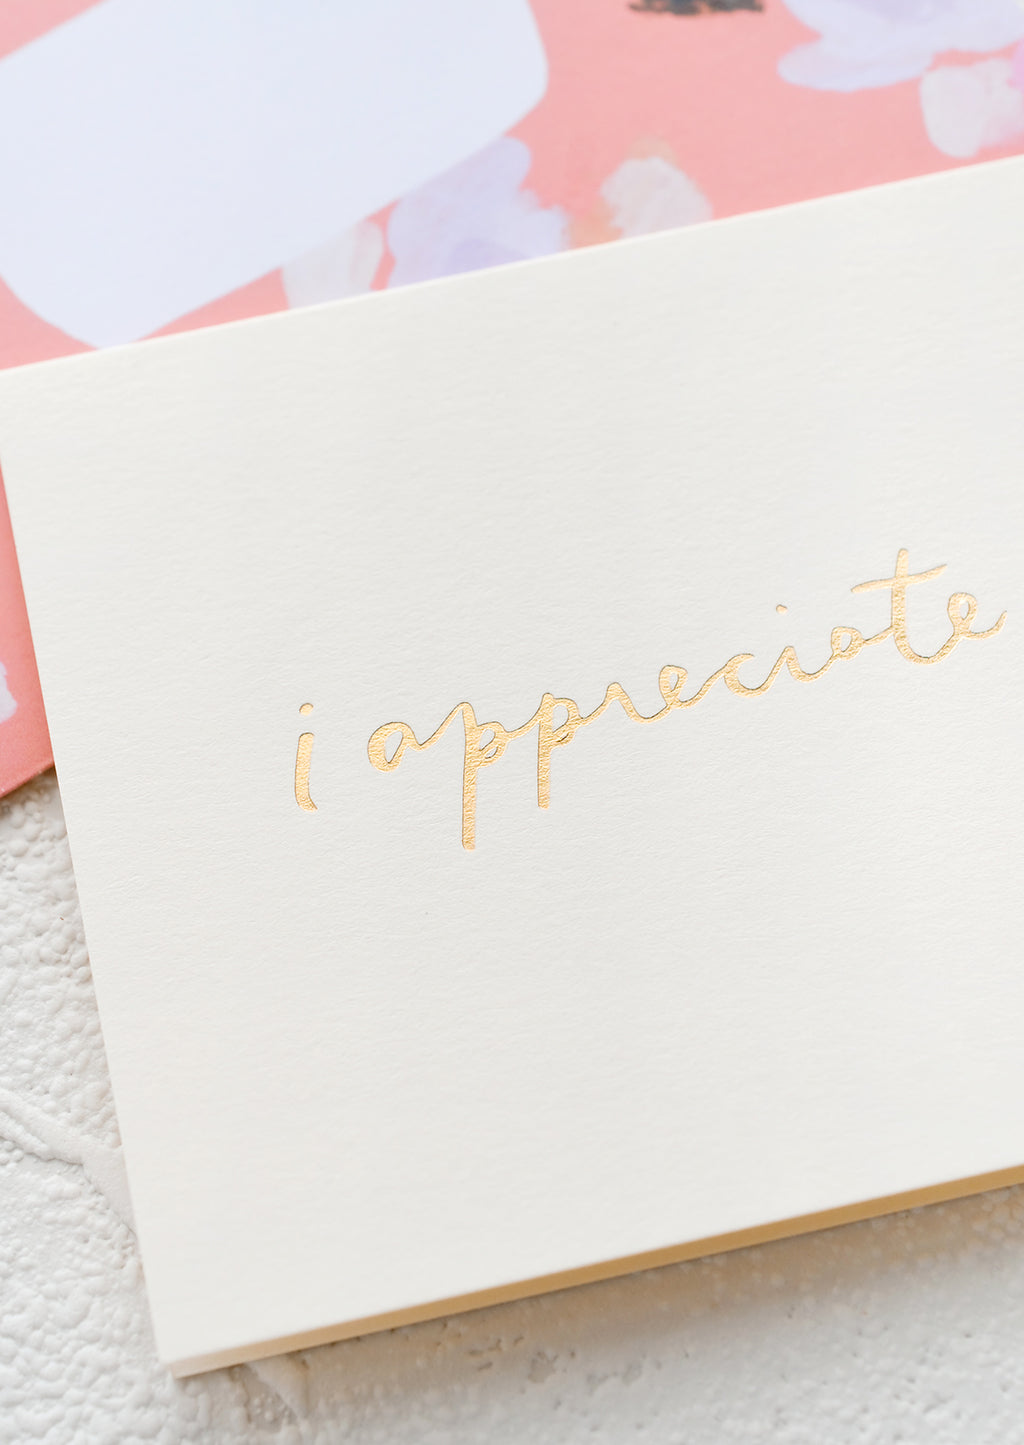 2: A white greeting card with golden cursive reading "I Appreciate You".